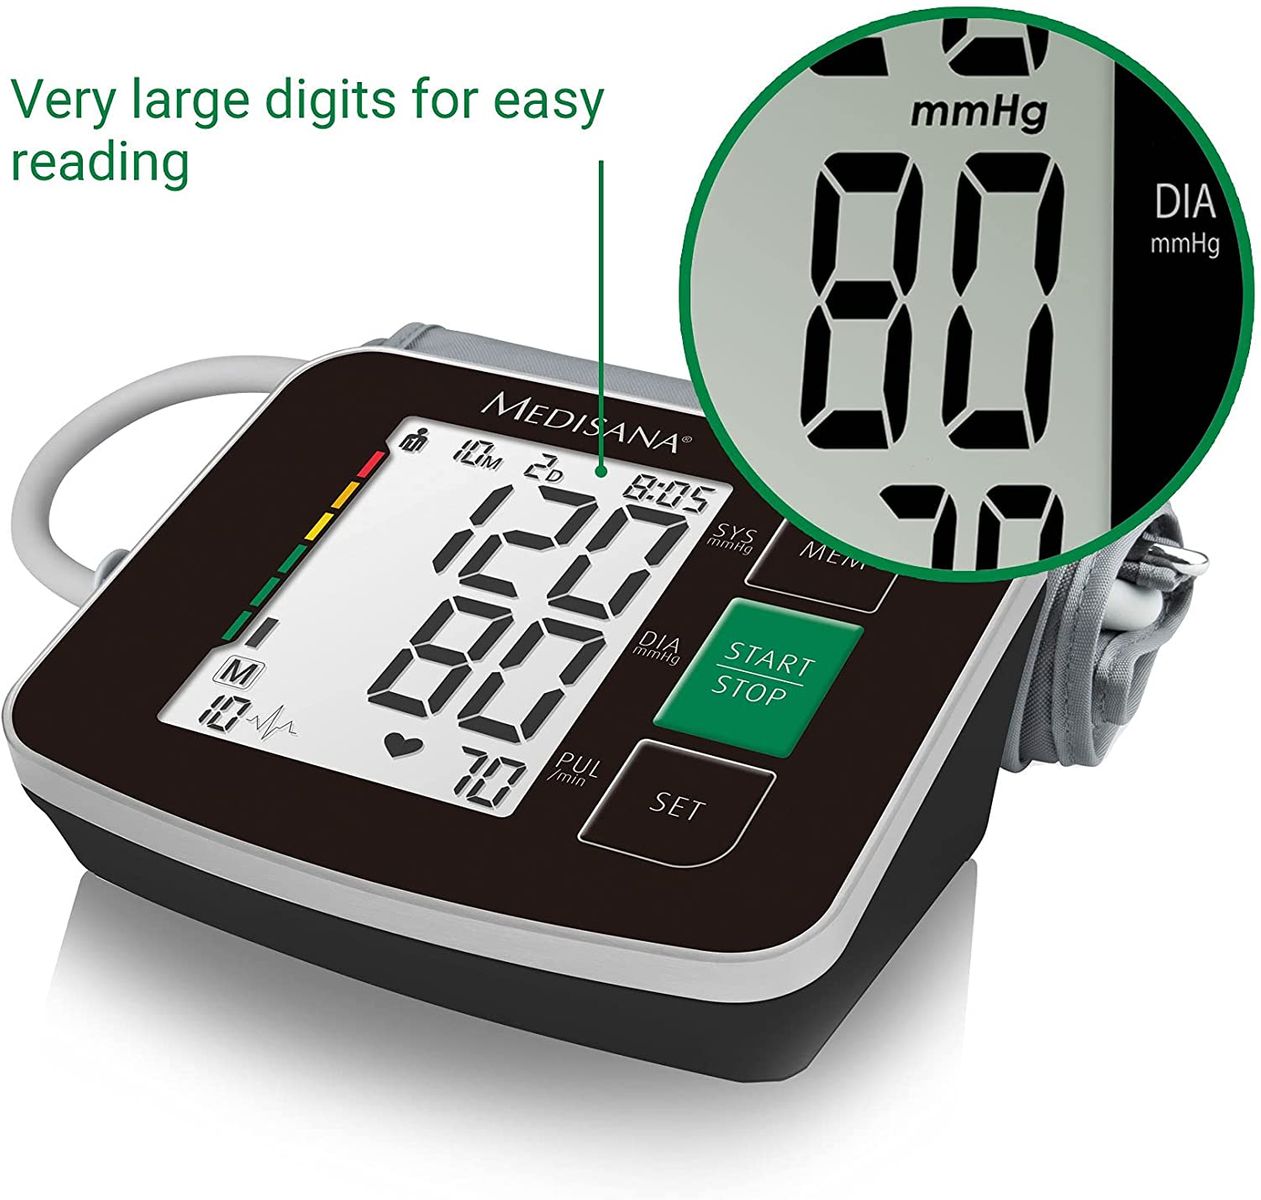 Medisana BU 516 Upper arm blood pressure monitor black without cable, arrhythmia display, WHO traffic light color scale, for precise blood pressure measurement and pulse measurement with memory function.